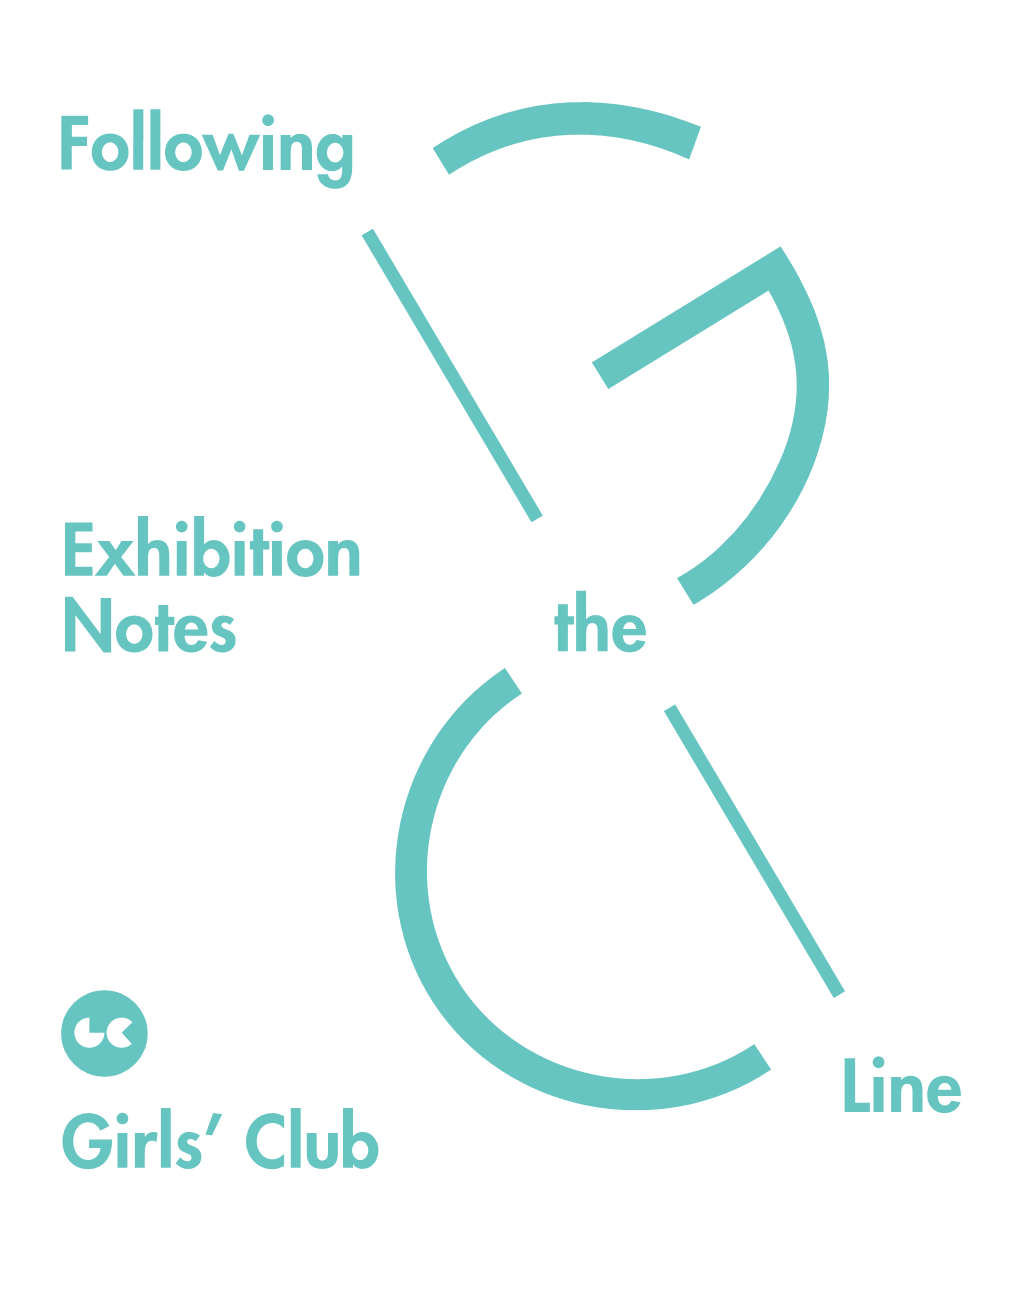 Following the Line Girls' Club Exhibition Notes